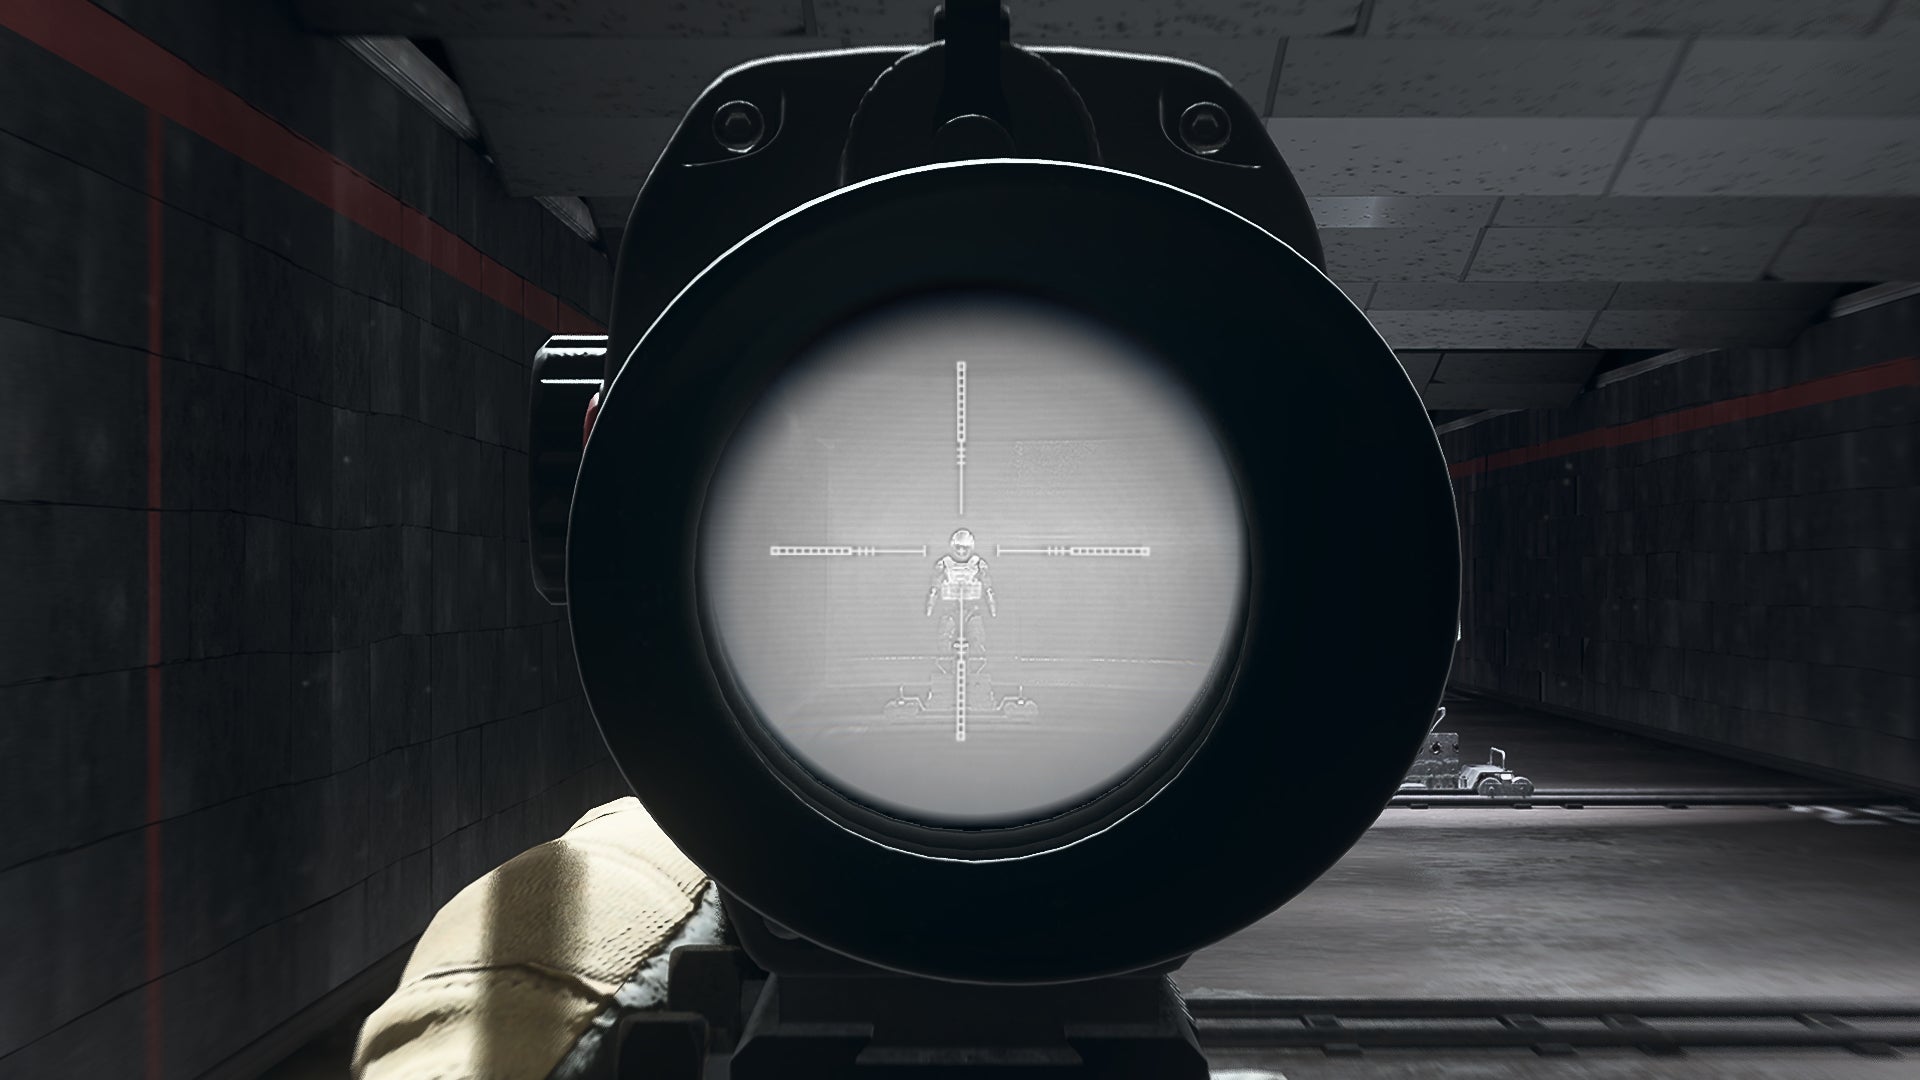 The player in Warzone 2.0 aims at a training dummy using the SZ Aggressor-IR Optic optic attachment.